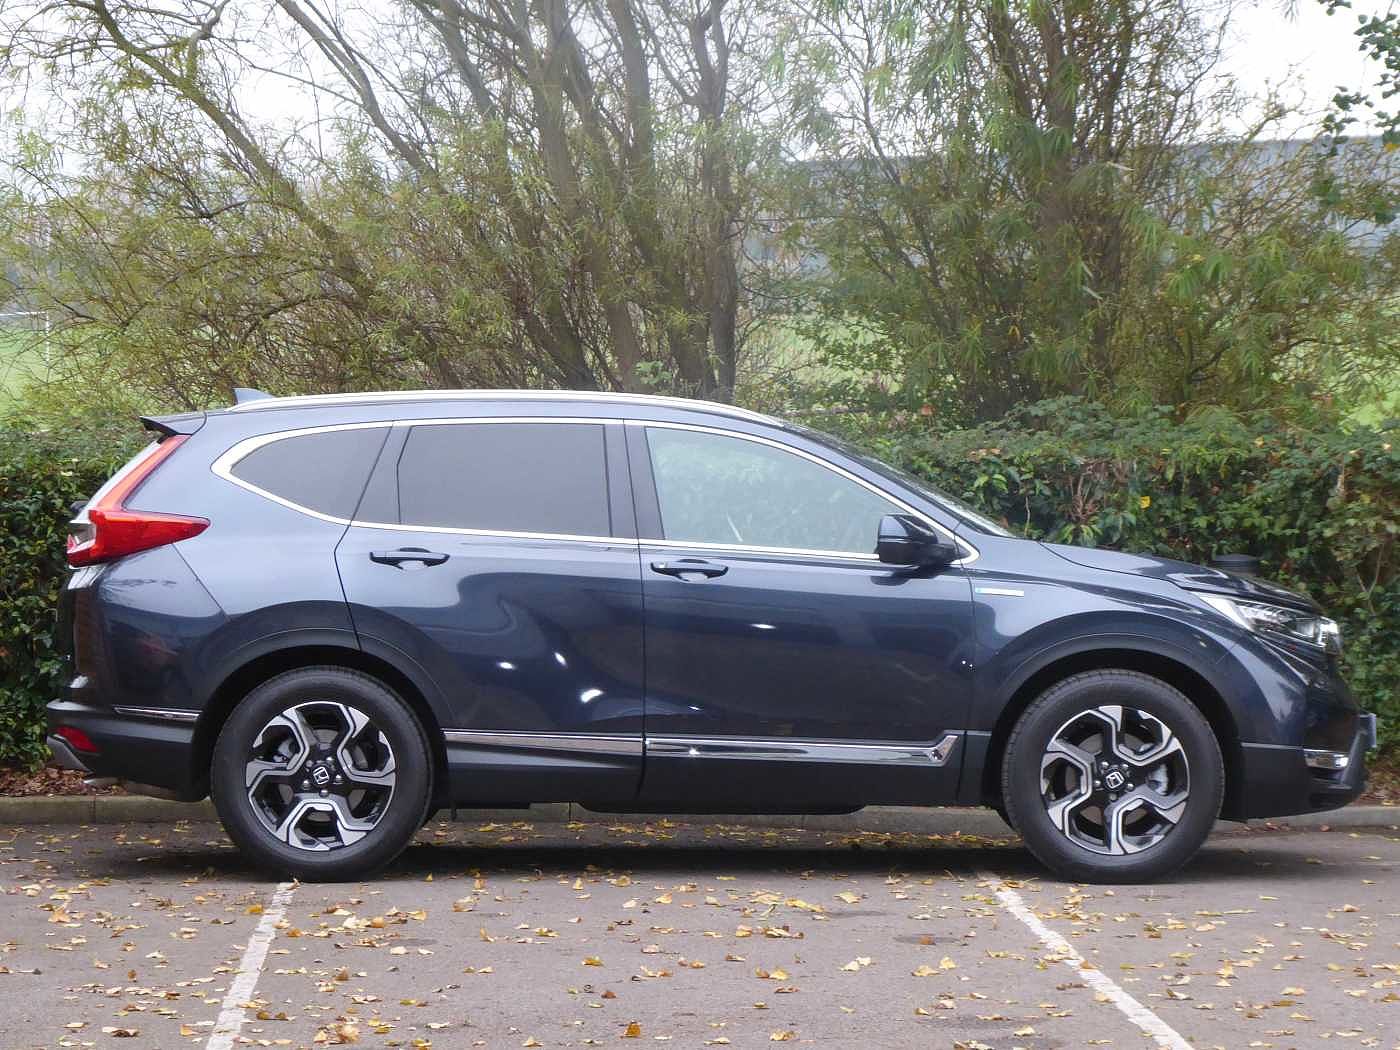 Used Honda CR-V: Hybrid Compact SUV | Buy Approved Second-Hand Models